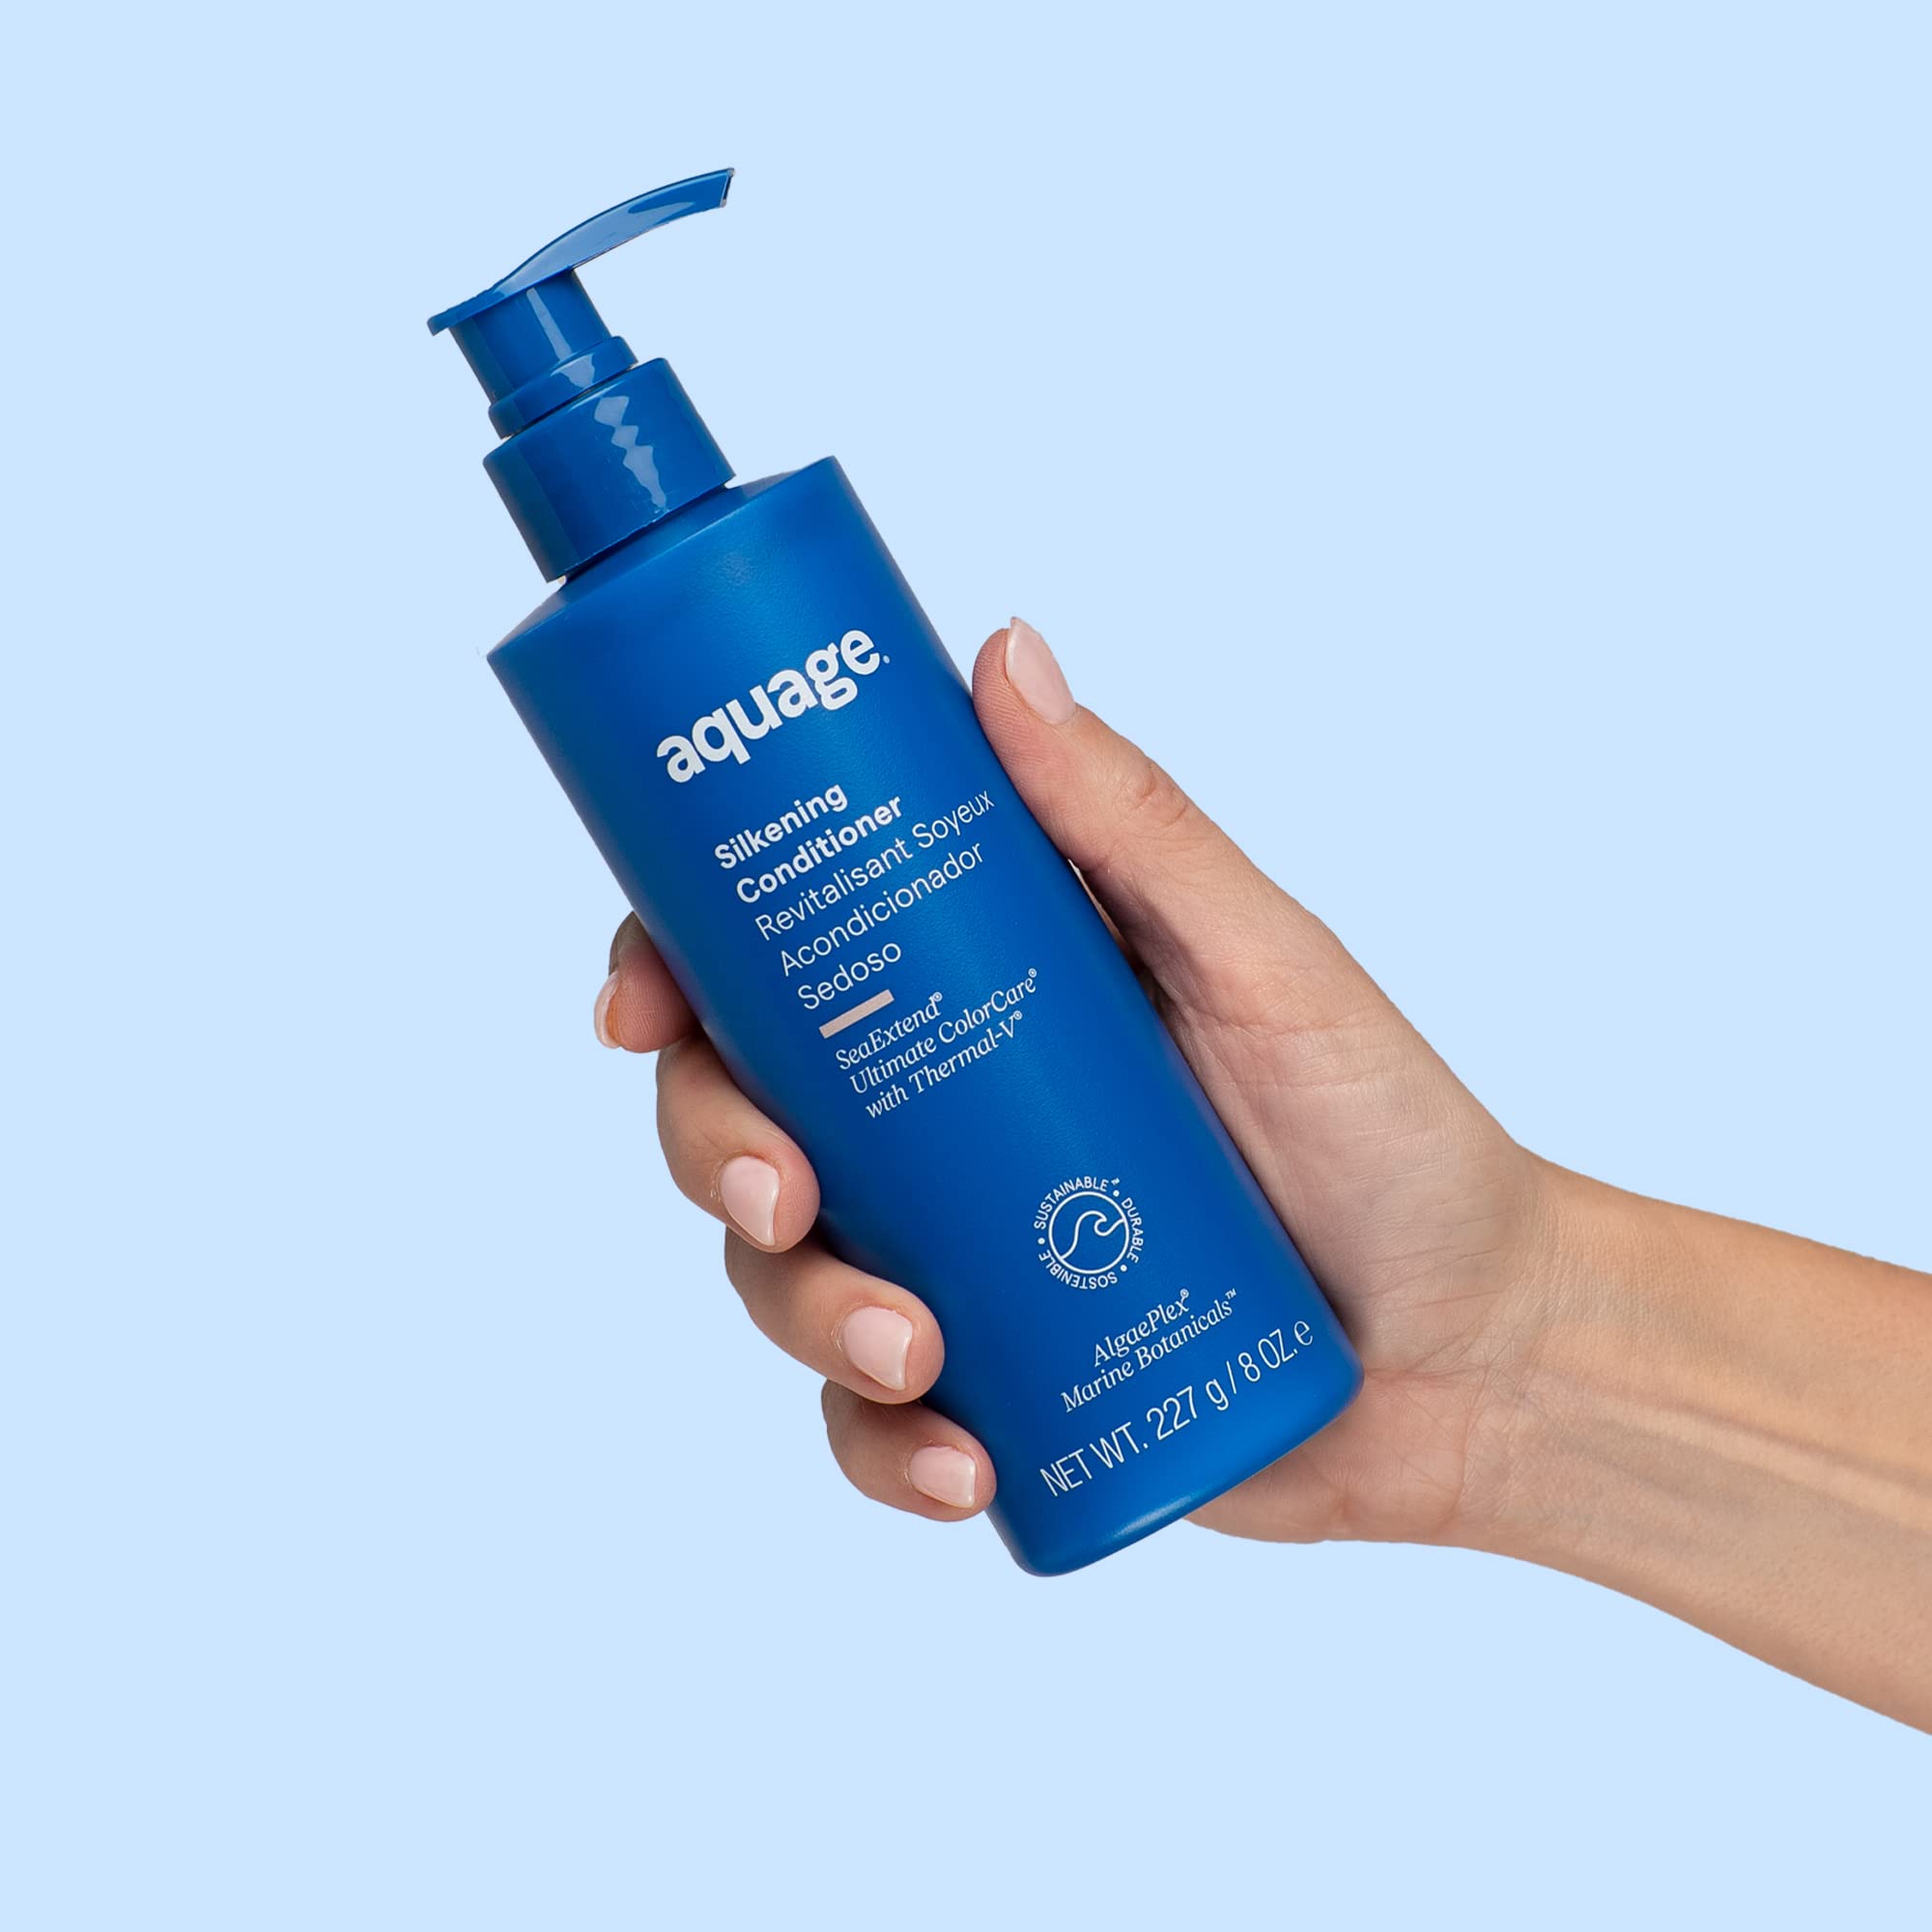 SeaExtend Silkening Conditioner - Improves Manageability and Prepares Hair for Sleek, Smooth Styling with Frizz-Free Results, 8 oz